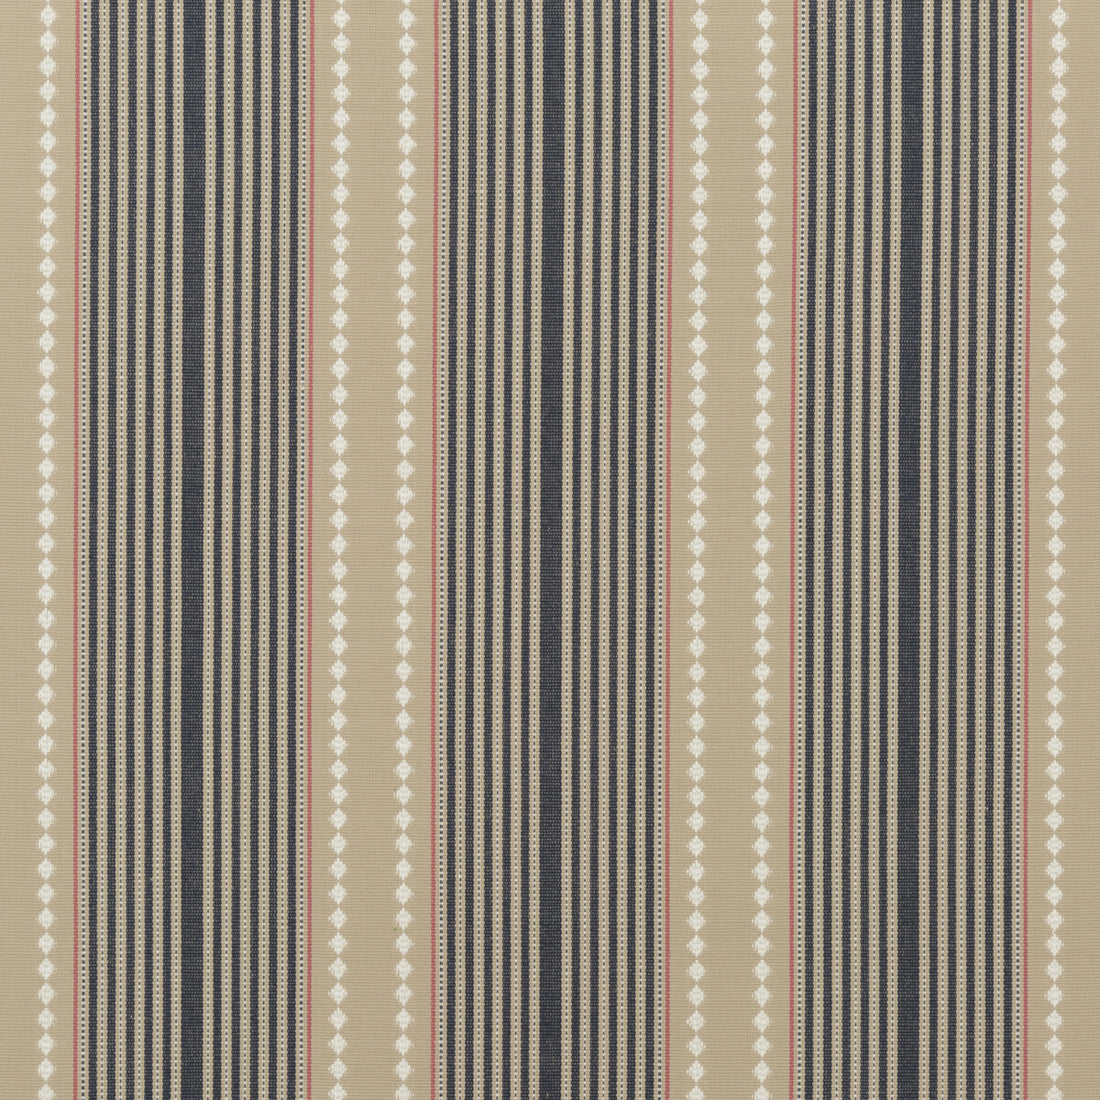 Brighton Stripe fabric in indigo/linen color - pattern FD753.H49.0 - by Mulberry in the Festival collection